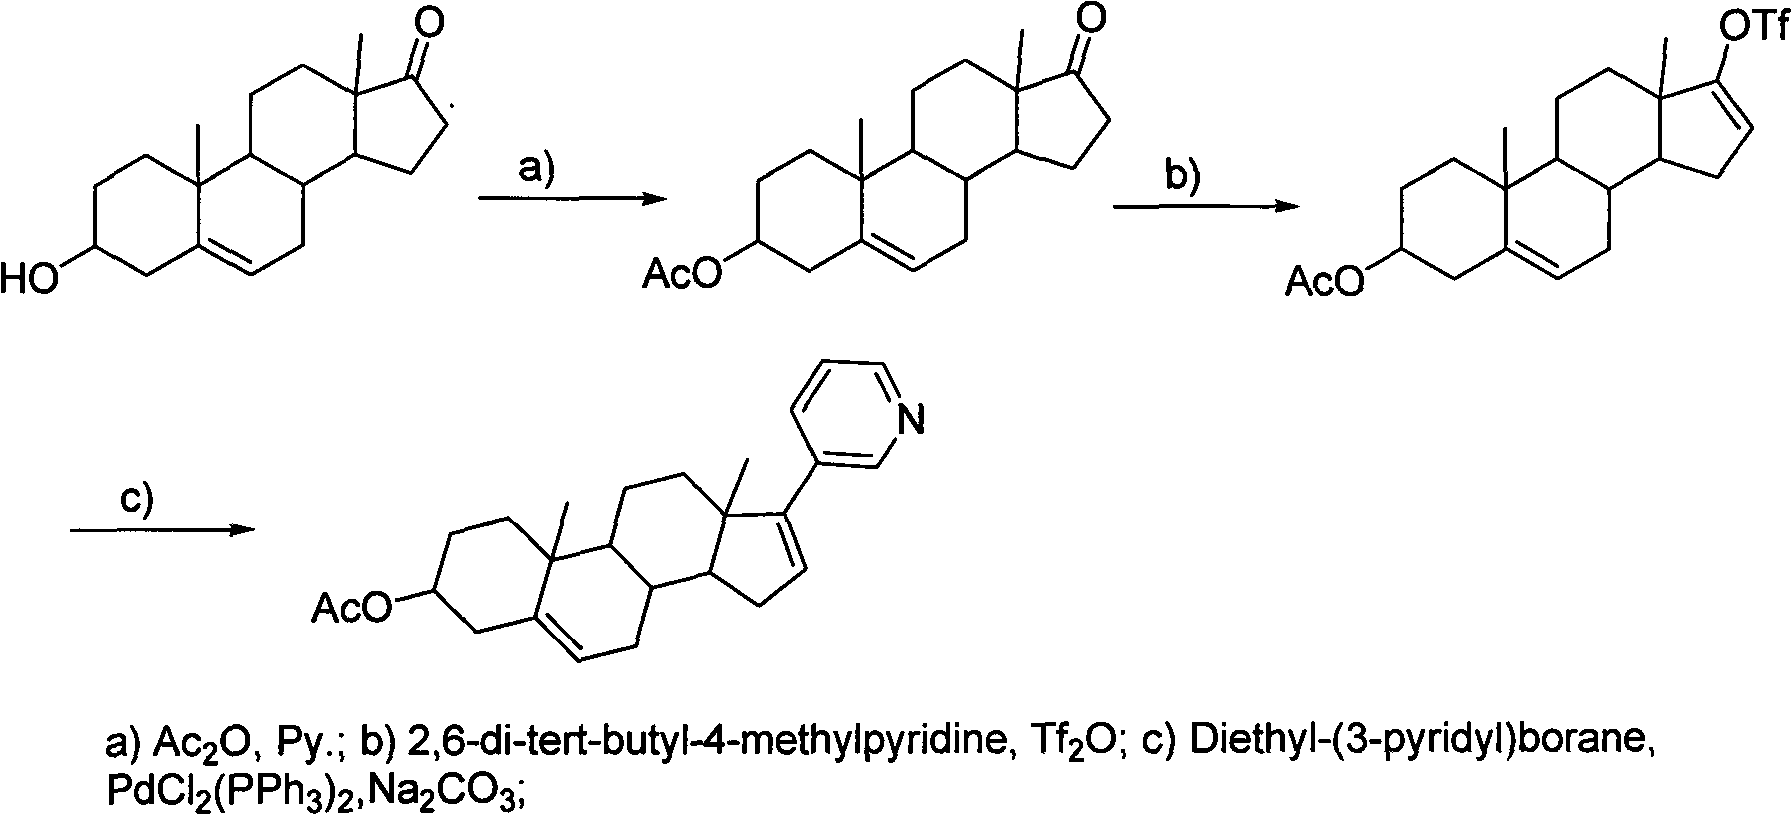 Novel synthesis method of Abiraterone acetate